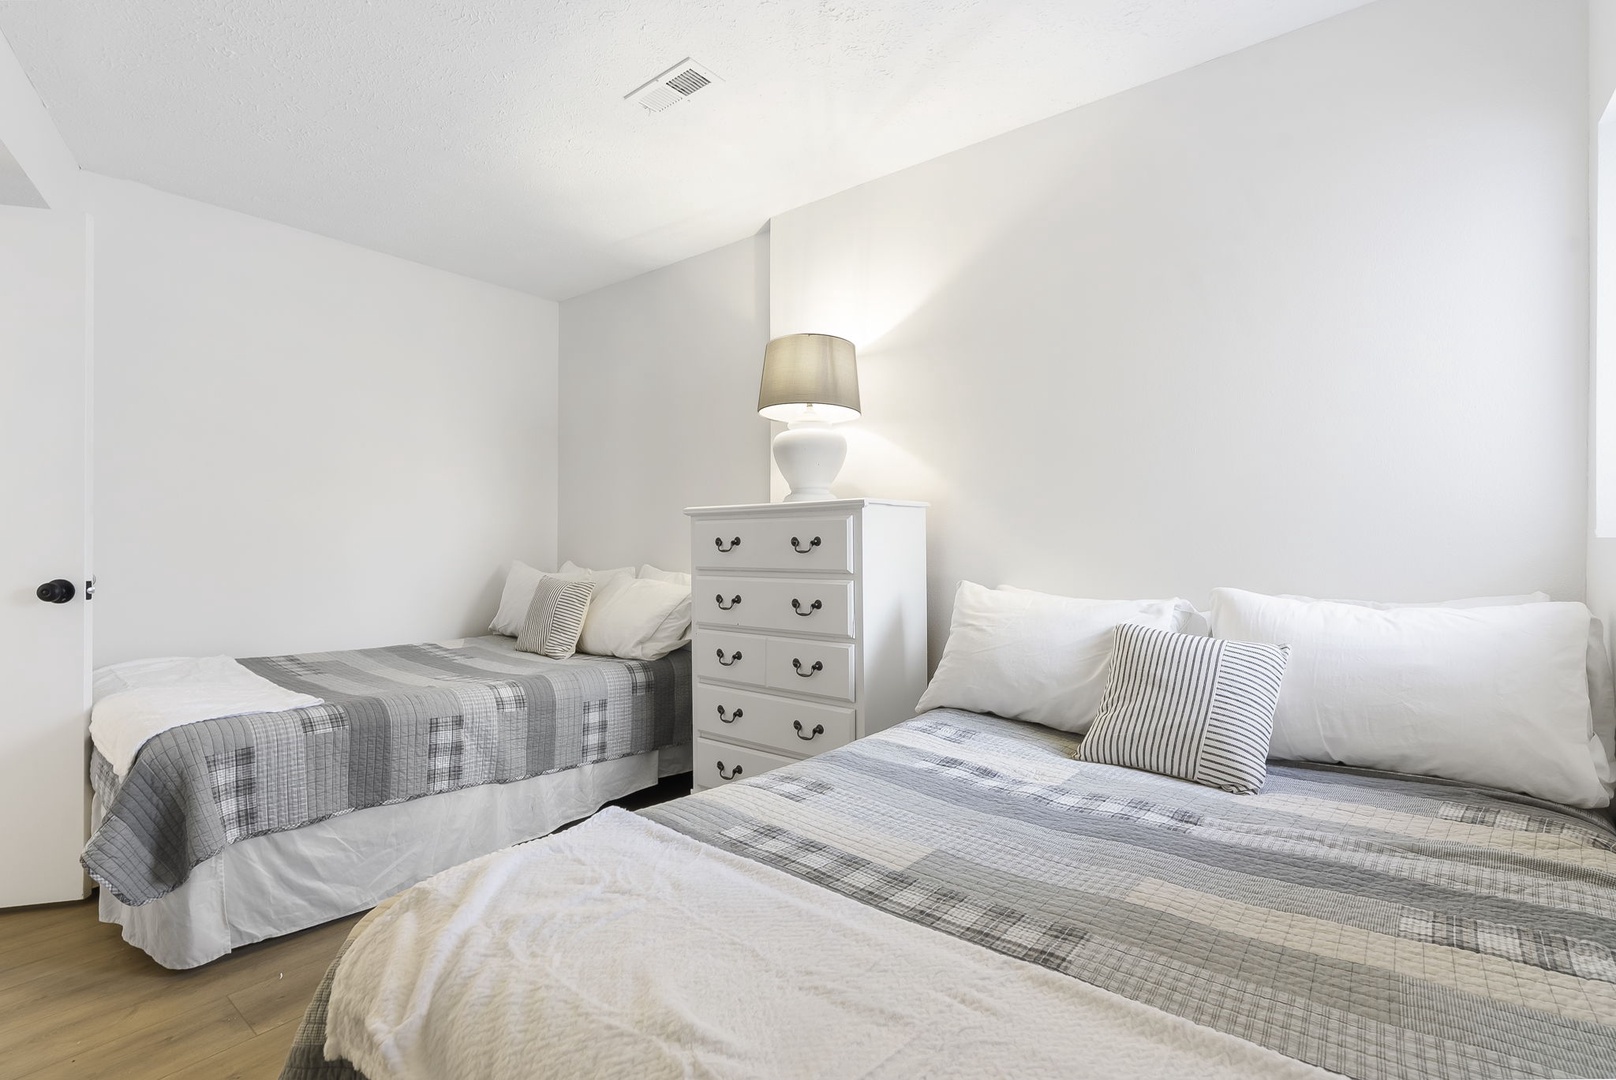 Unit 45: This 1st floor bedroom includes a pair of cozy full-sized beds